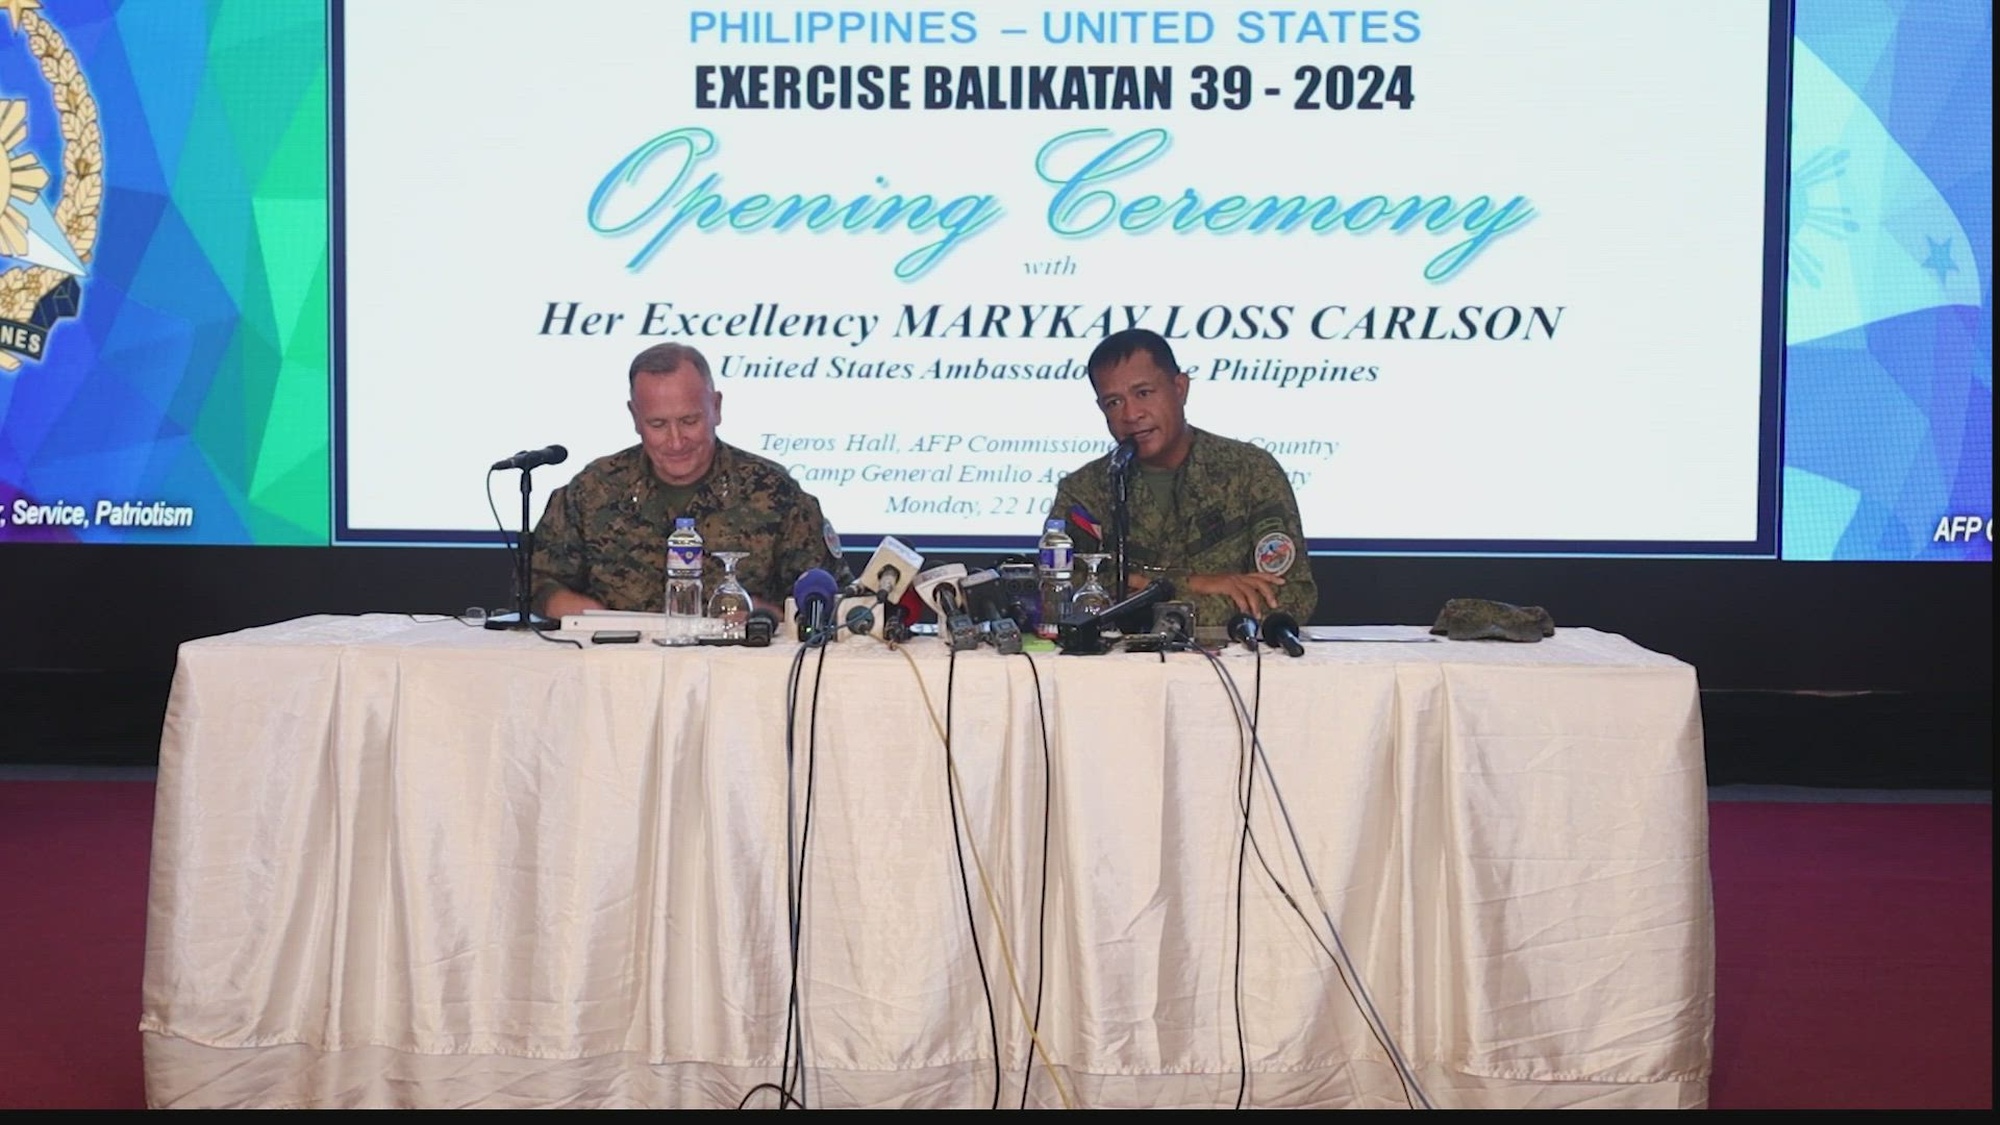 U.S. Marine Corps Lt. Gen. William M. Jurney, U.S. exercise director representative and Marine Forces Pacific commanding general, and Armed Forces of the Philippines Maj. Gen. Marvin L Licudine Pa, the Philippine exercise director, conduct a press conference following the opening ceremony for Exercise Balikatan 24 at Camp Aguinaldo, Manila, Philippines, April 22, 2024. BK 24 is an annual exercise between the Armed Forces of the Philippines and the U.S. military designed to strengthen bilateral interoperability, capabilities, trust, and cooperation built over decades of shared experiences. (U.S. Marine Corps video by Lance Cpl. Christian Radosti)